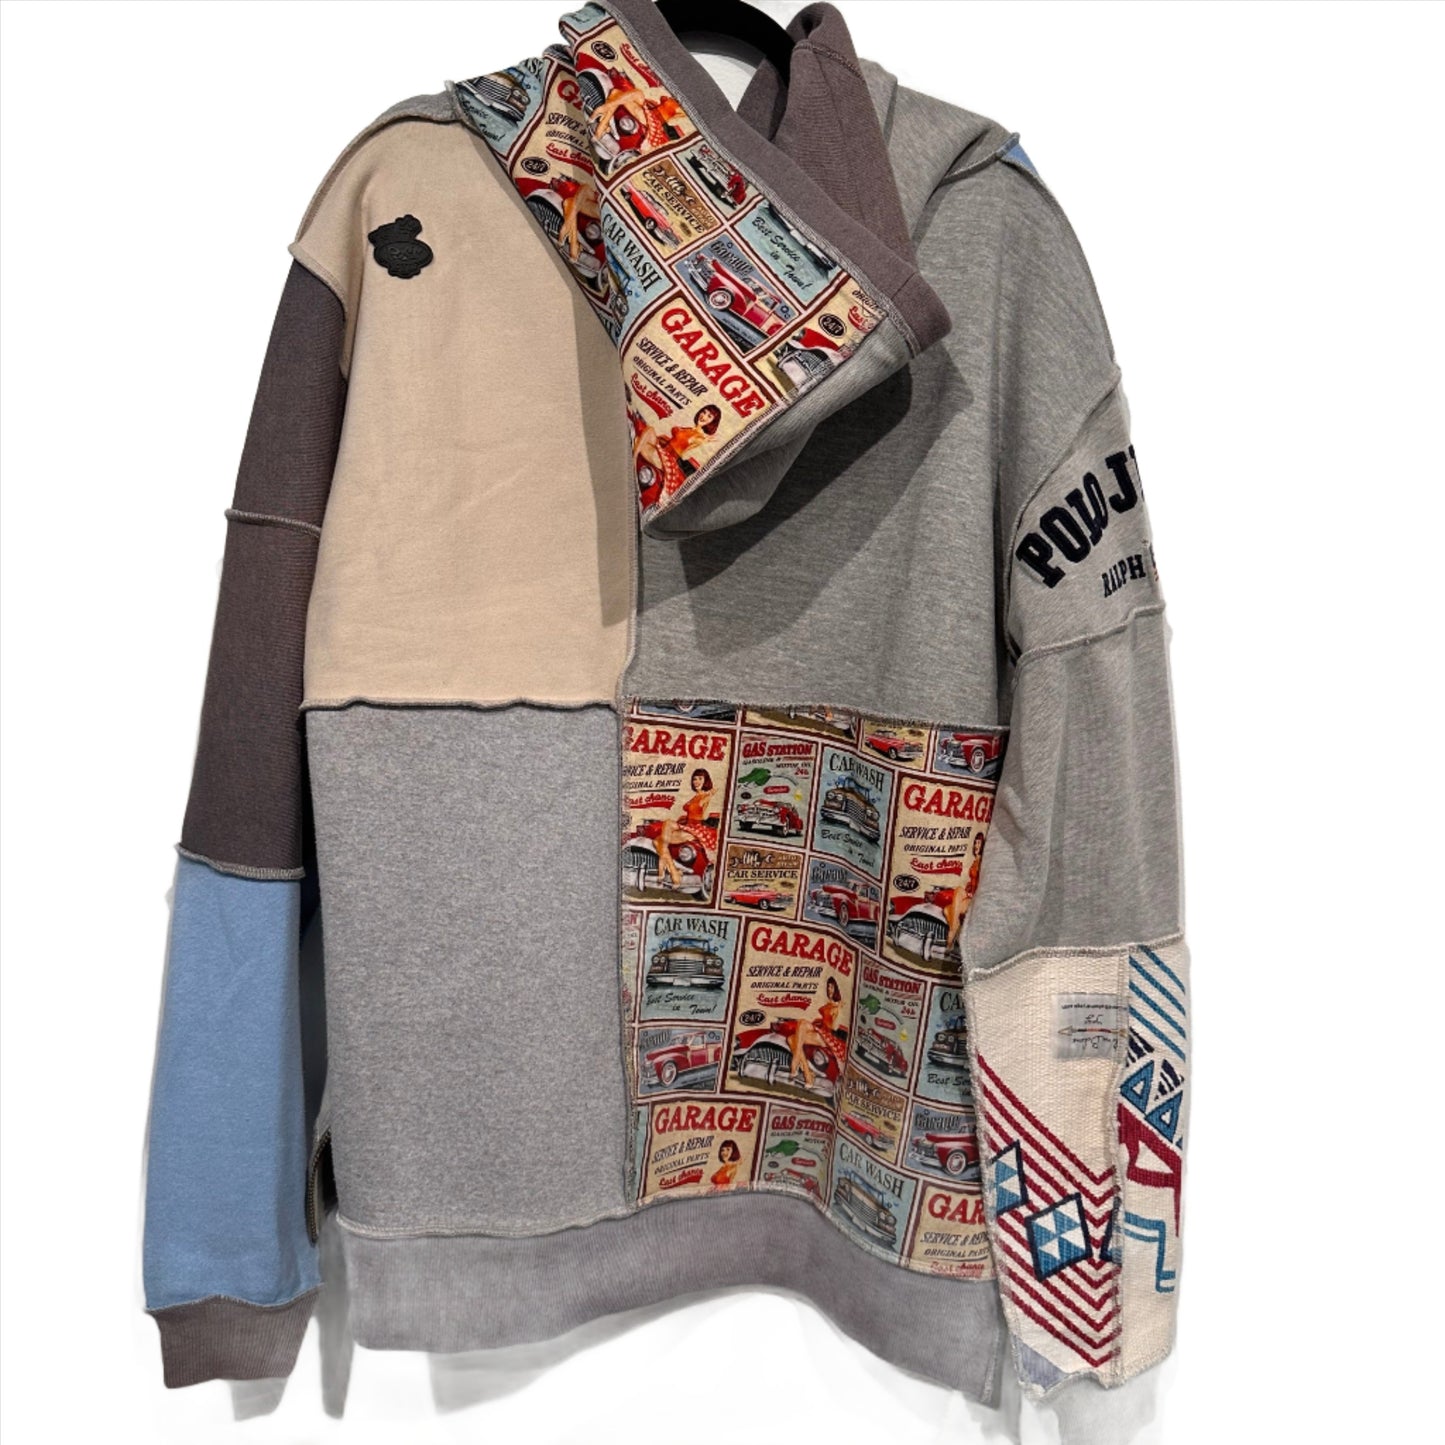 Hi Post "Mosaic" HOODED PULLOVER 1 of 1: the "OXFORD"